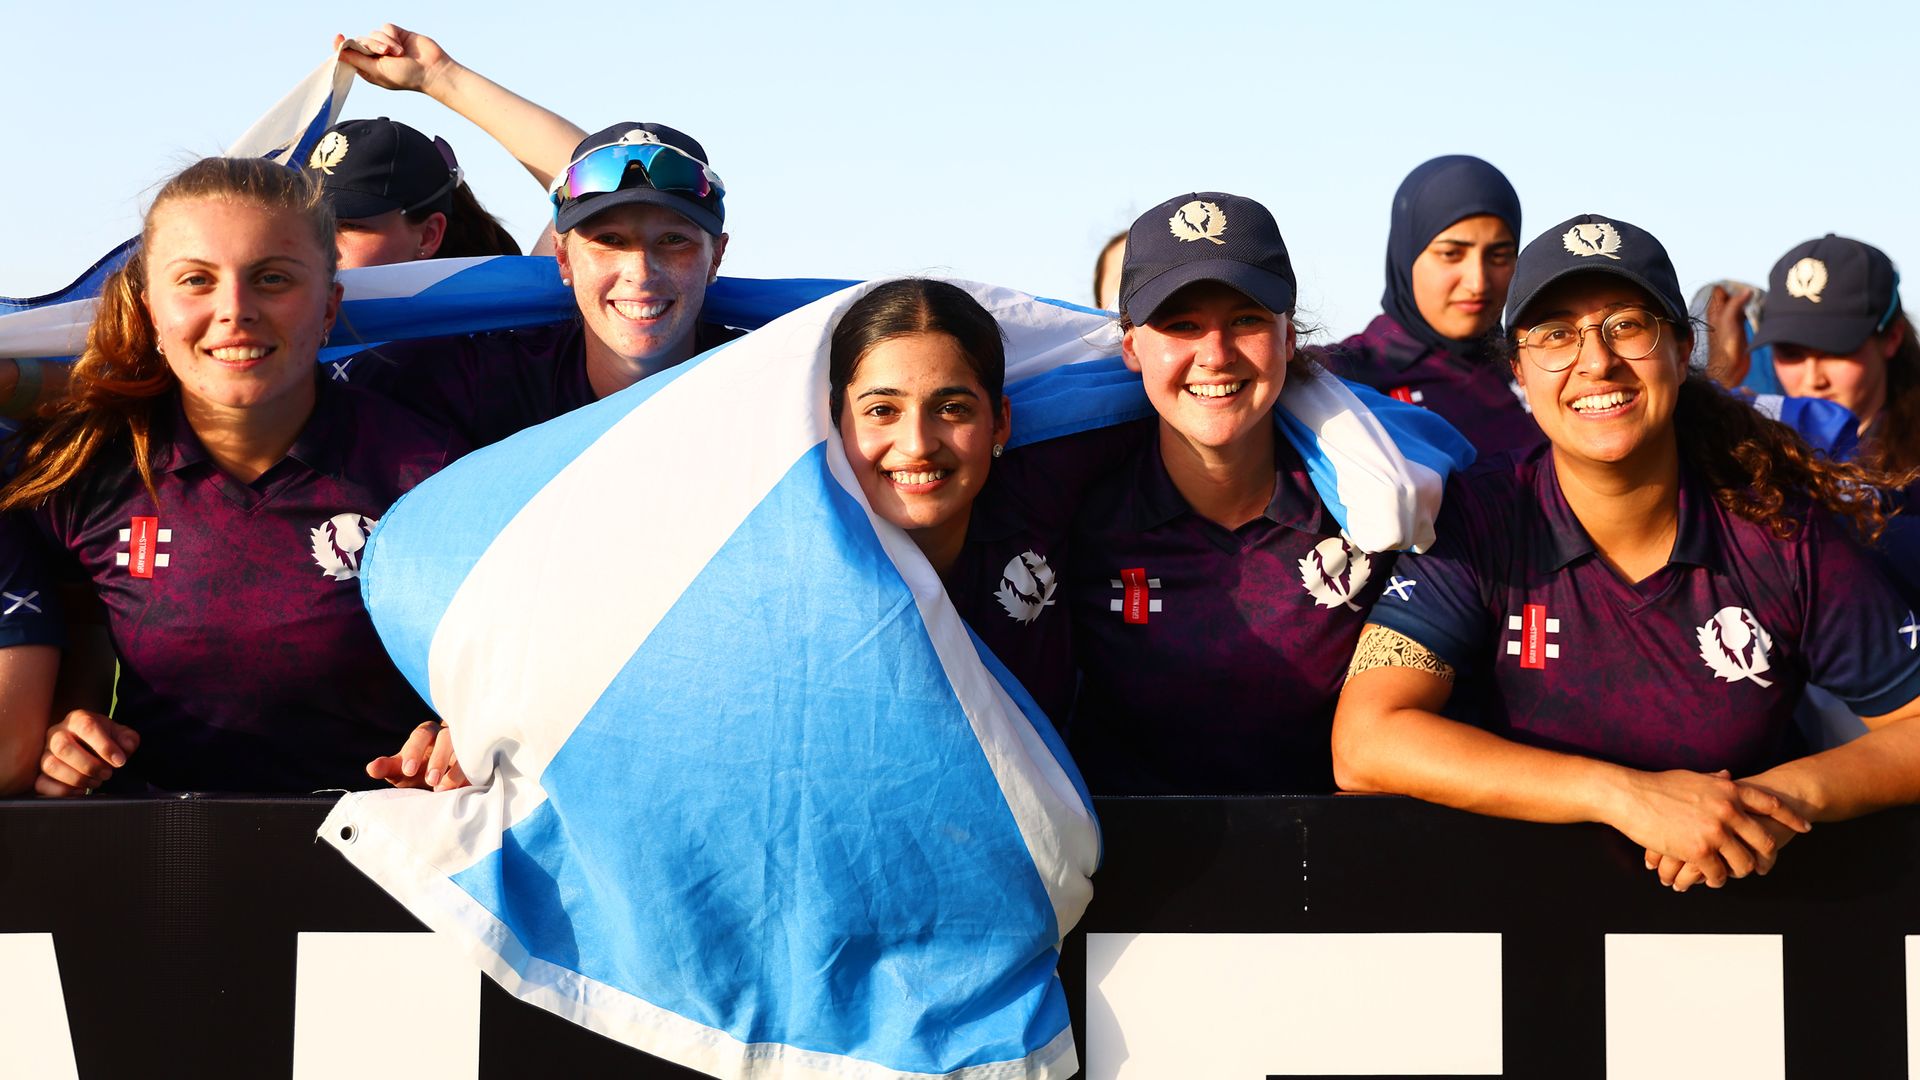 Scotland to face England after qualifying for first Women's T20 World Cup